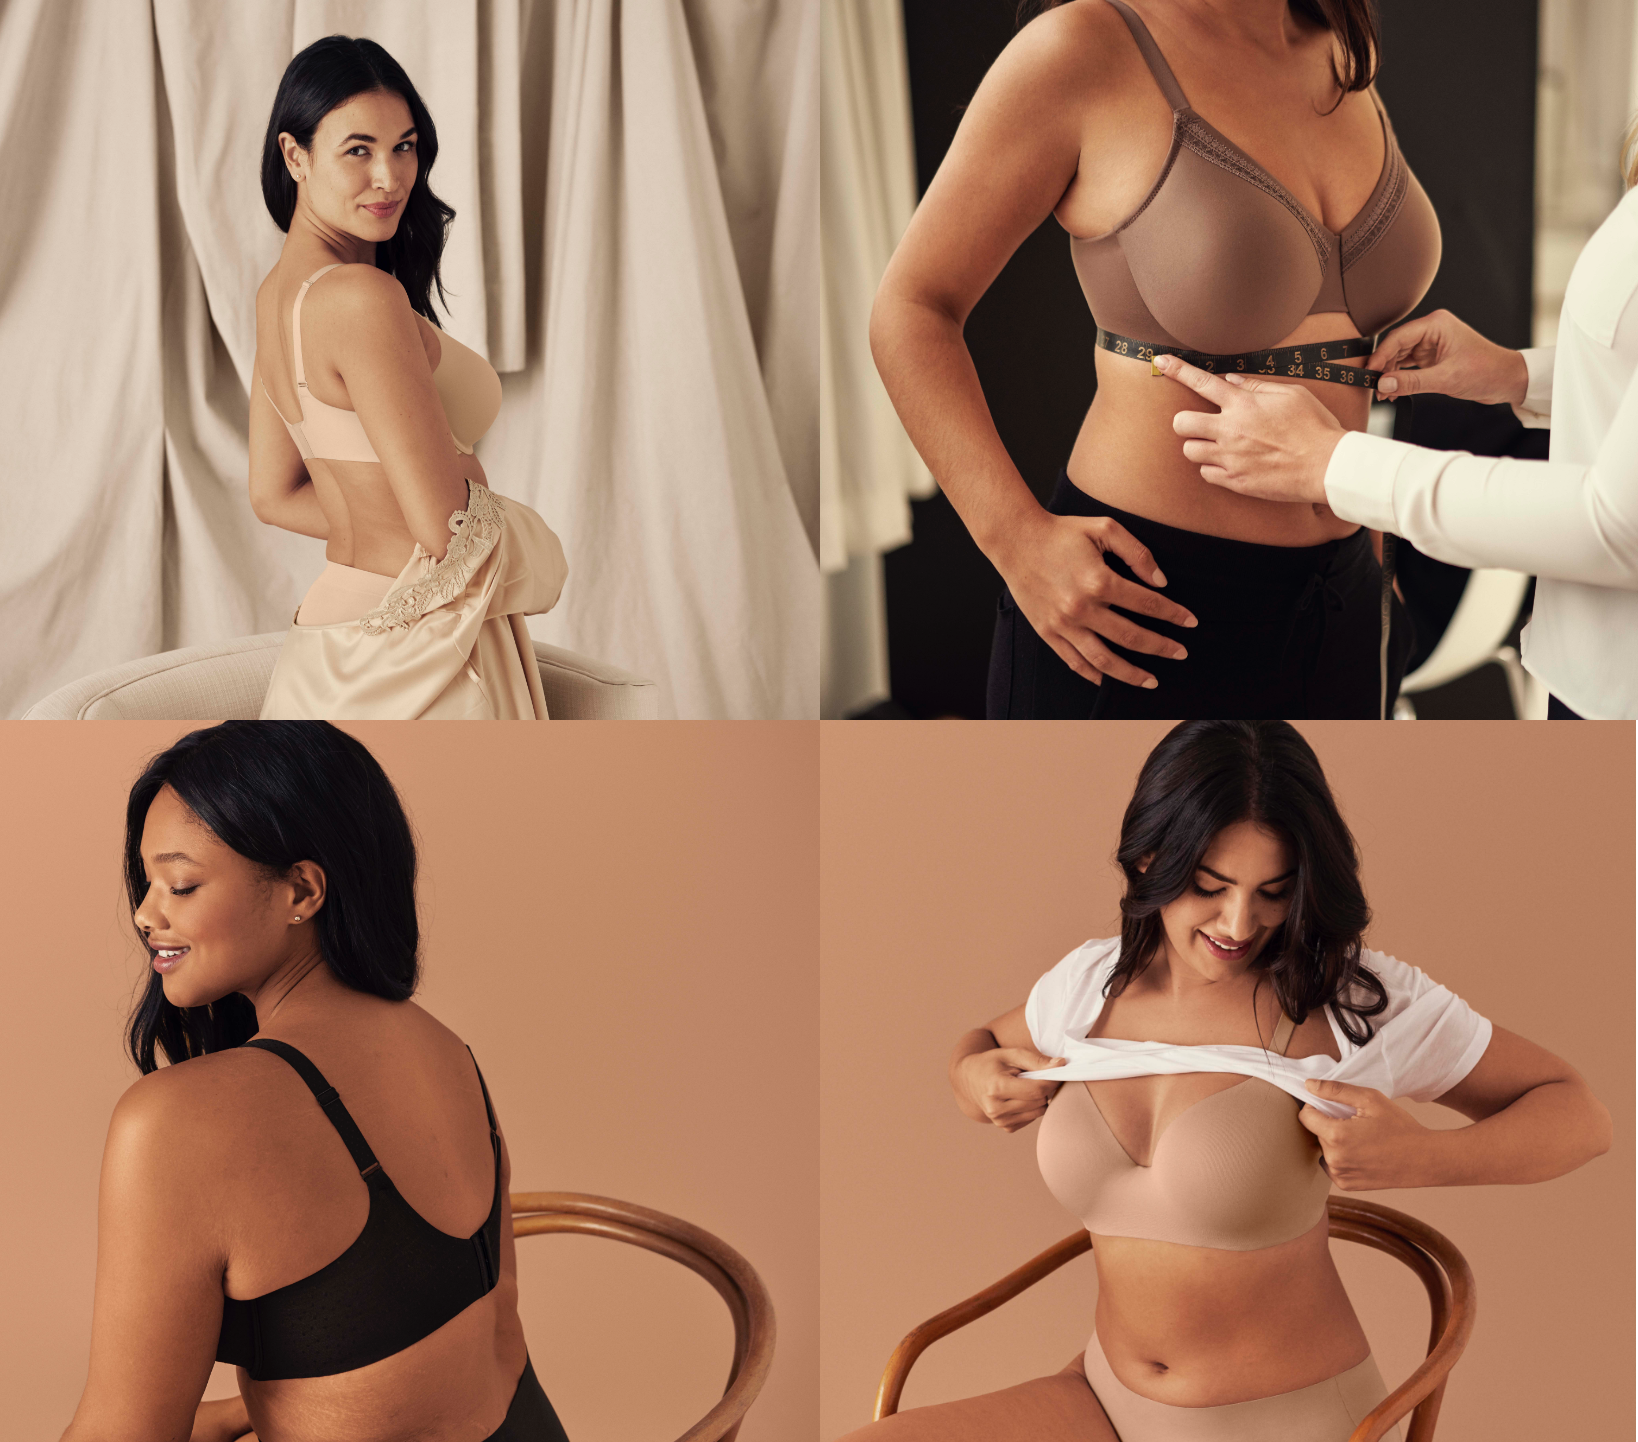 Wacoal - Comfortable, Supportive Bras & Women's Intimate Apparel